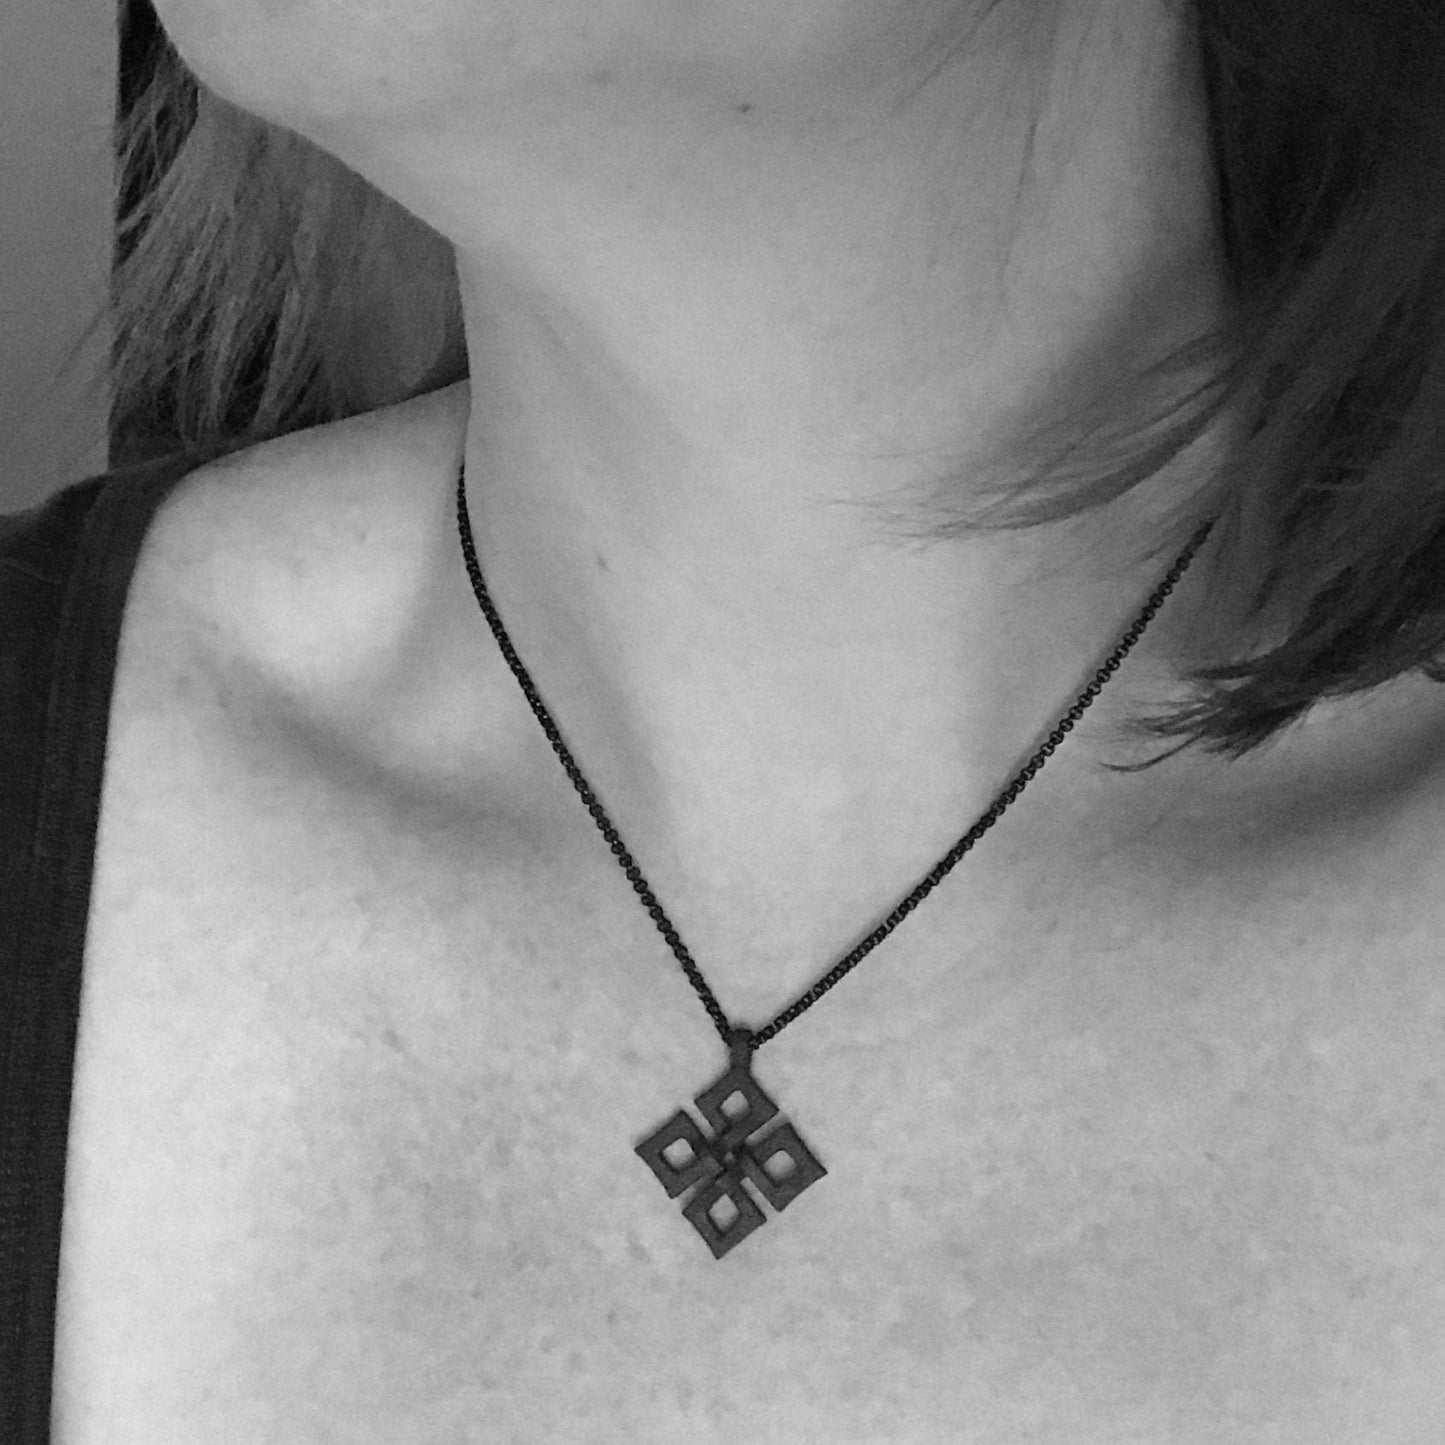 Necklace | Celtic Knot Cross & Classic Rope Chain | Sanity Jewelry 2mm 22” Black Rope Necklace